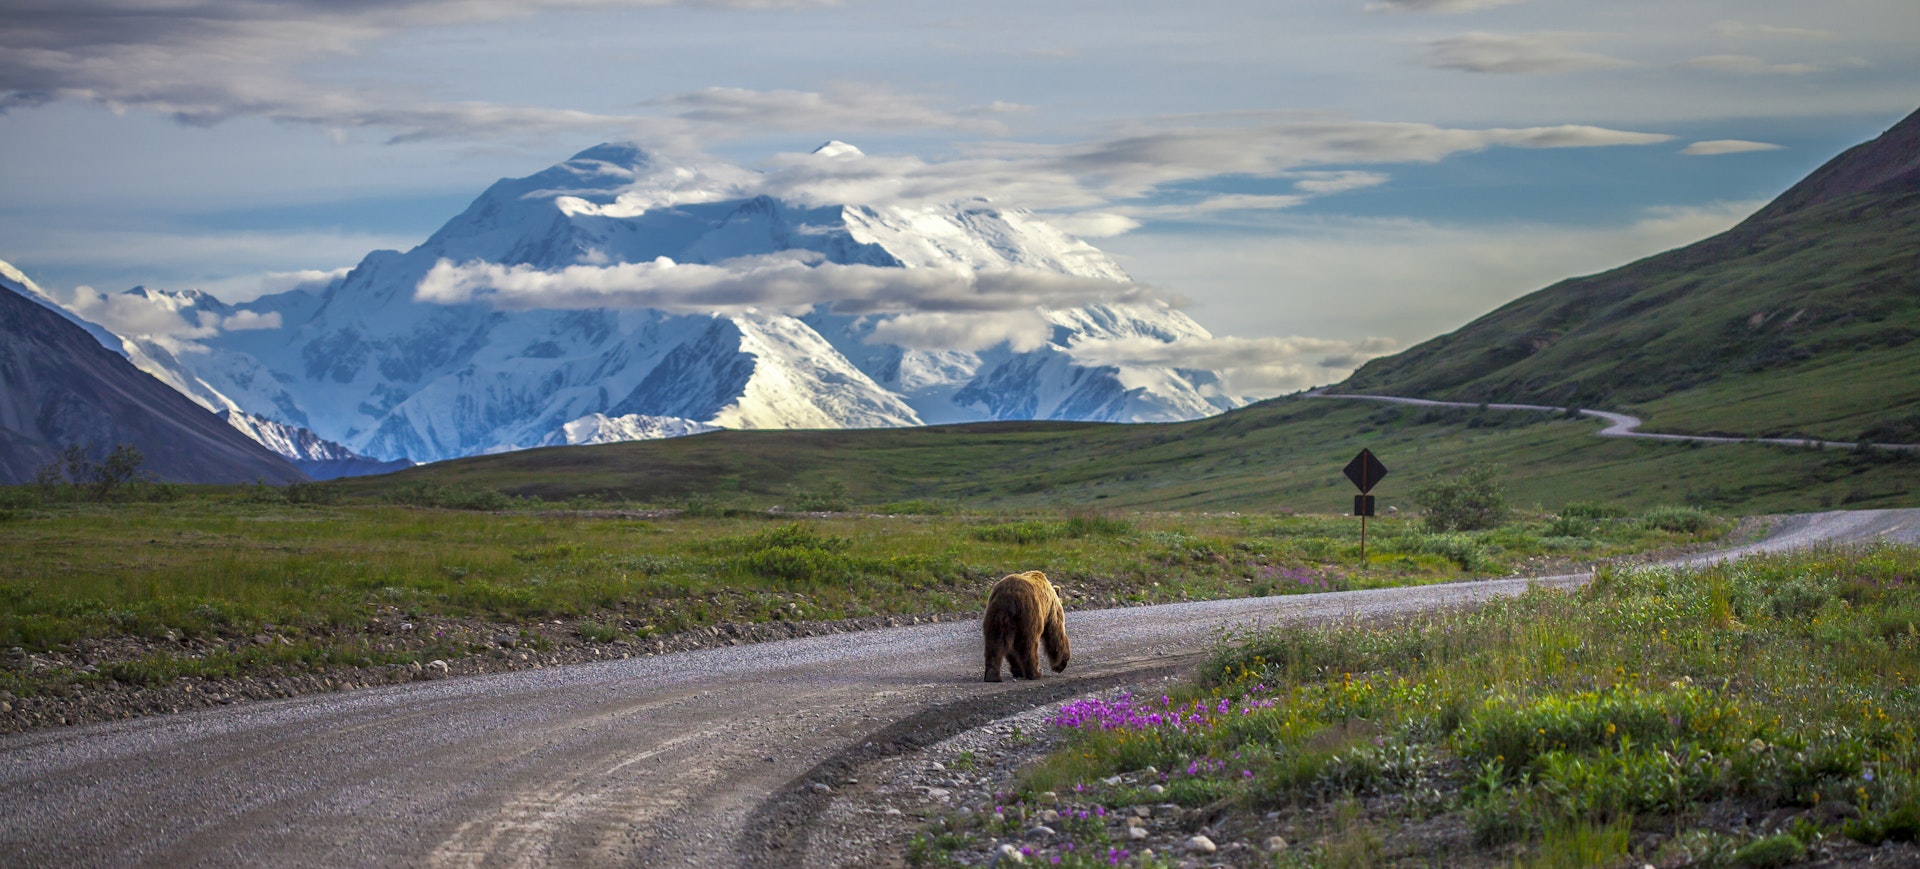 A bear wanders down a paved road through a national park backed by a huge snow-capped mountain